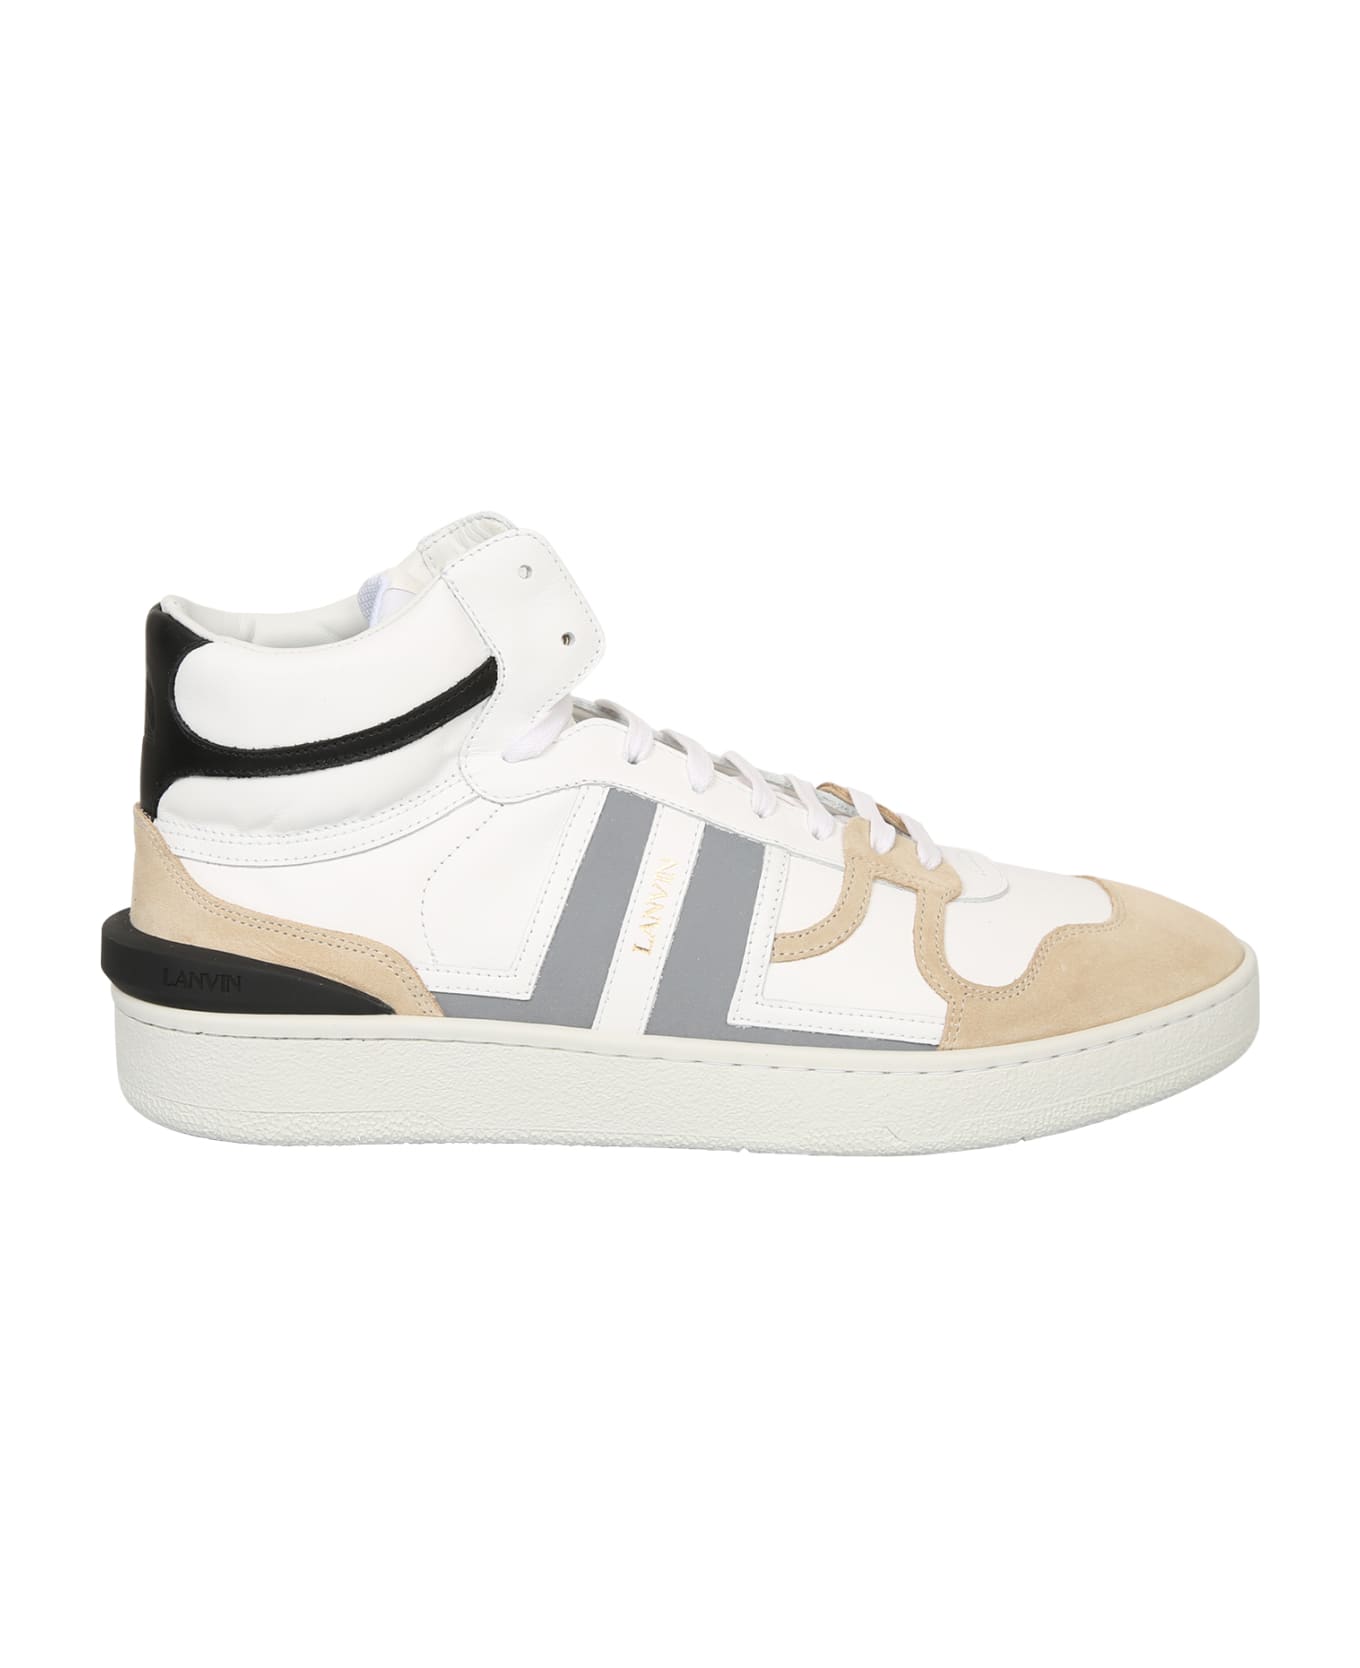 Lanvin Sneakers High Top Clay Bia/arg - White